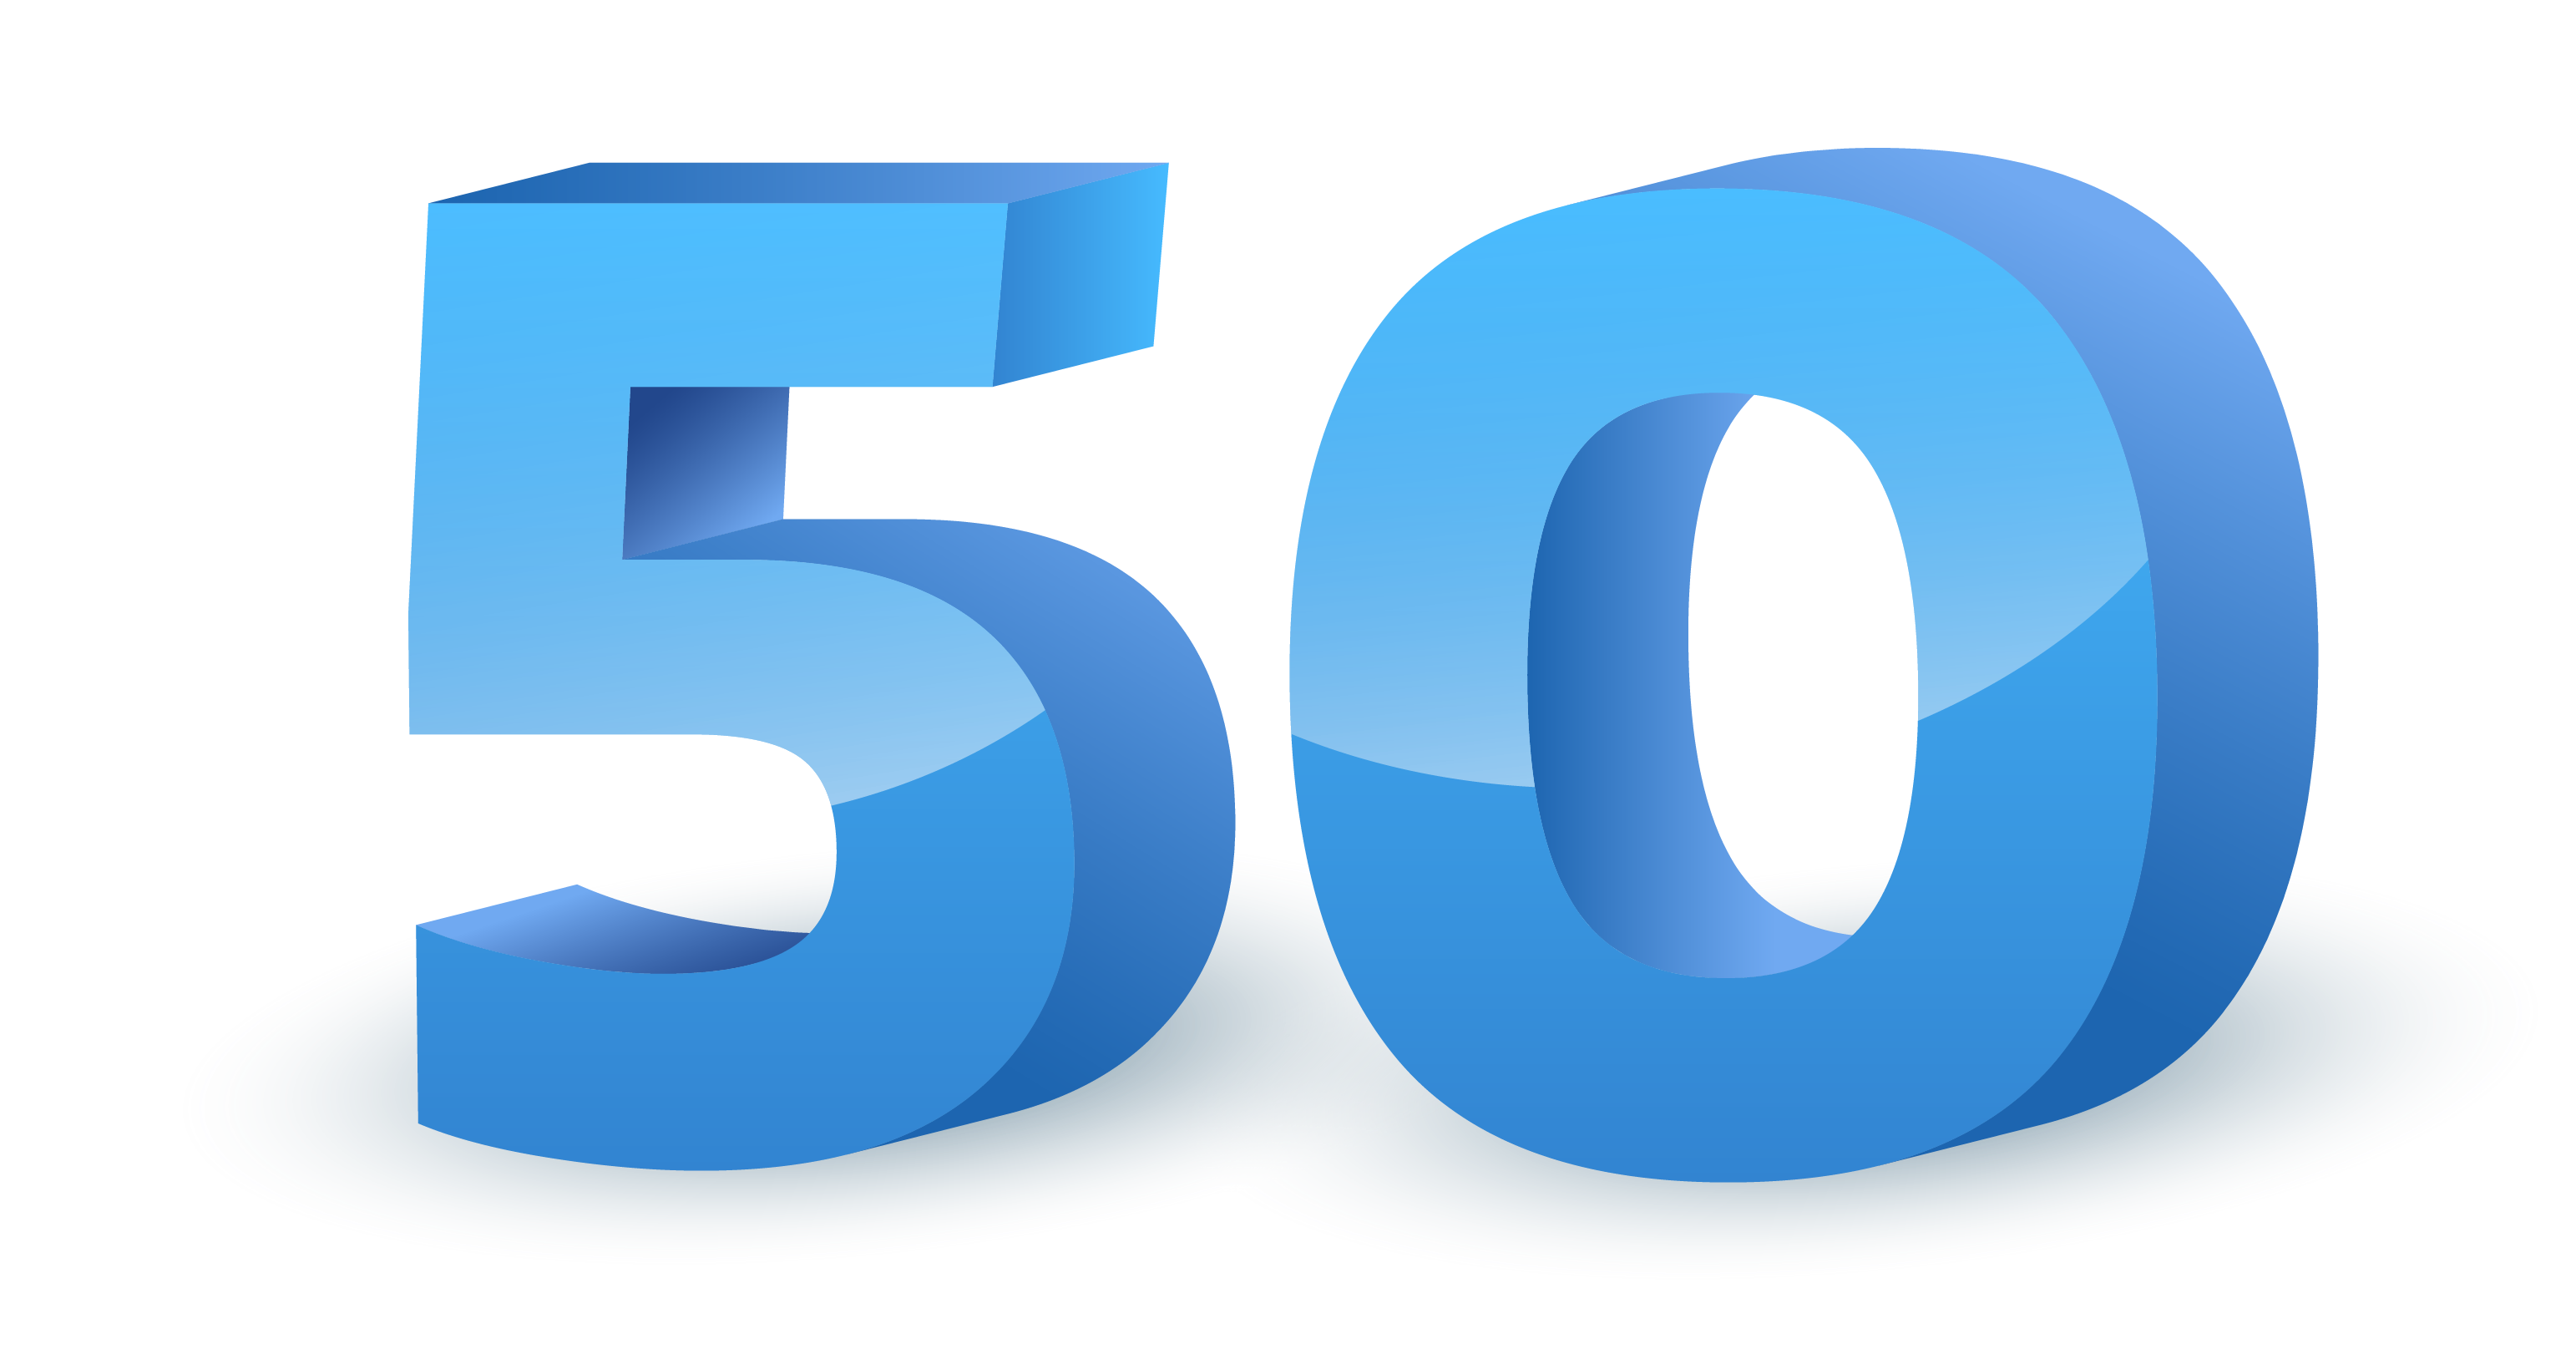 50 Number PNG Images Transparent Background | PNG Play